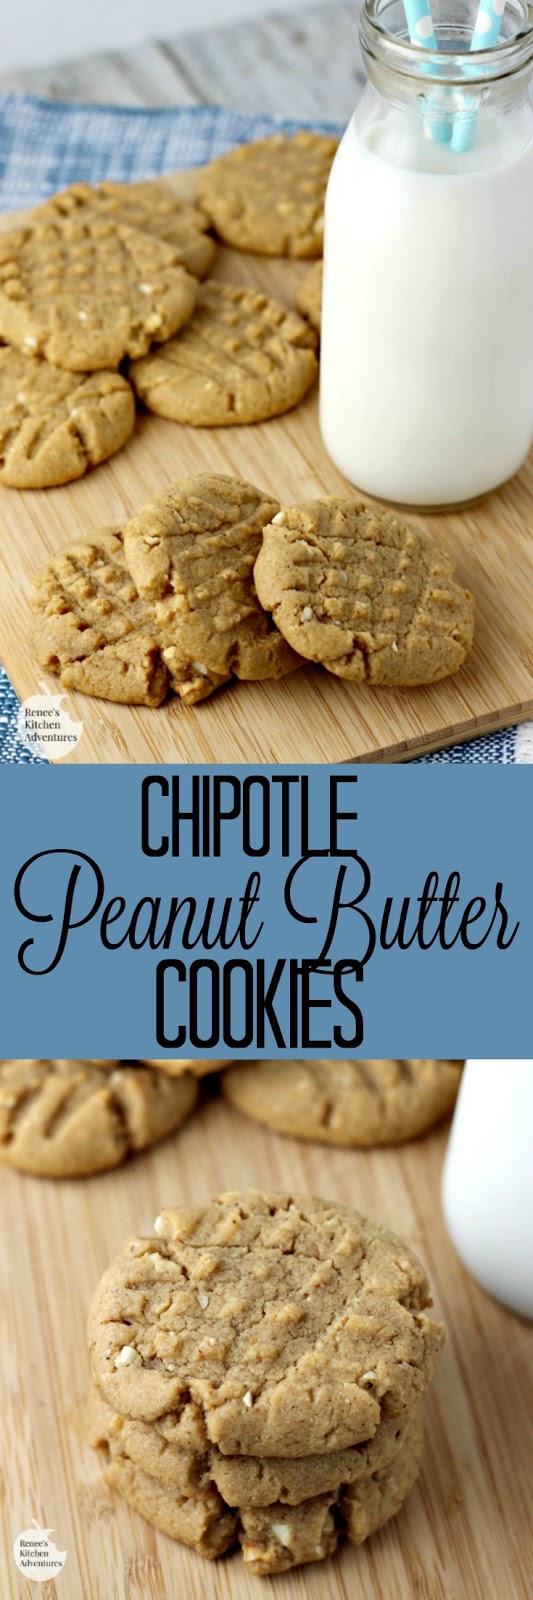 Chipotle Peanut Butter Cookies | by Renee's Kitchen Adventures - cookie recipe for a spicy peanut butter cookie with some heat! #SundaySupper 